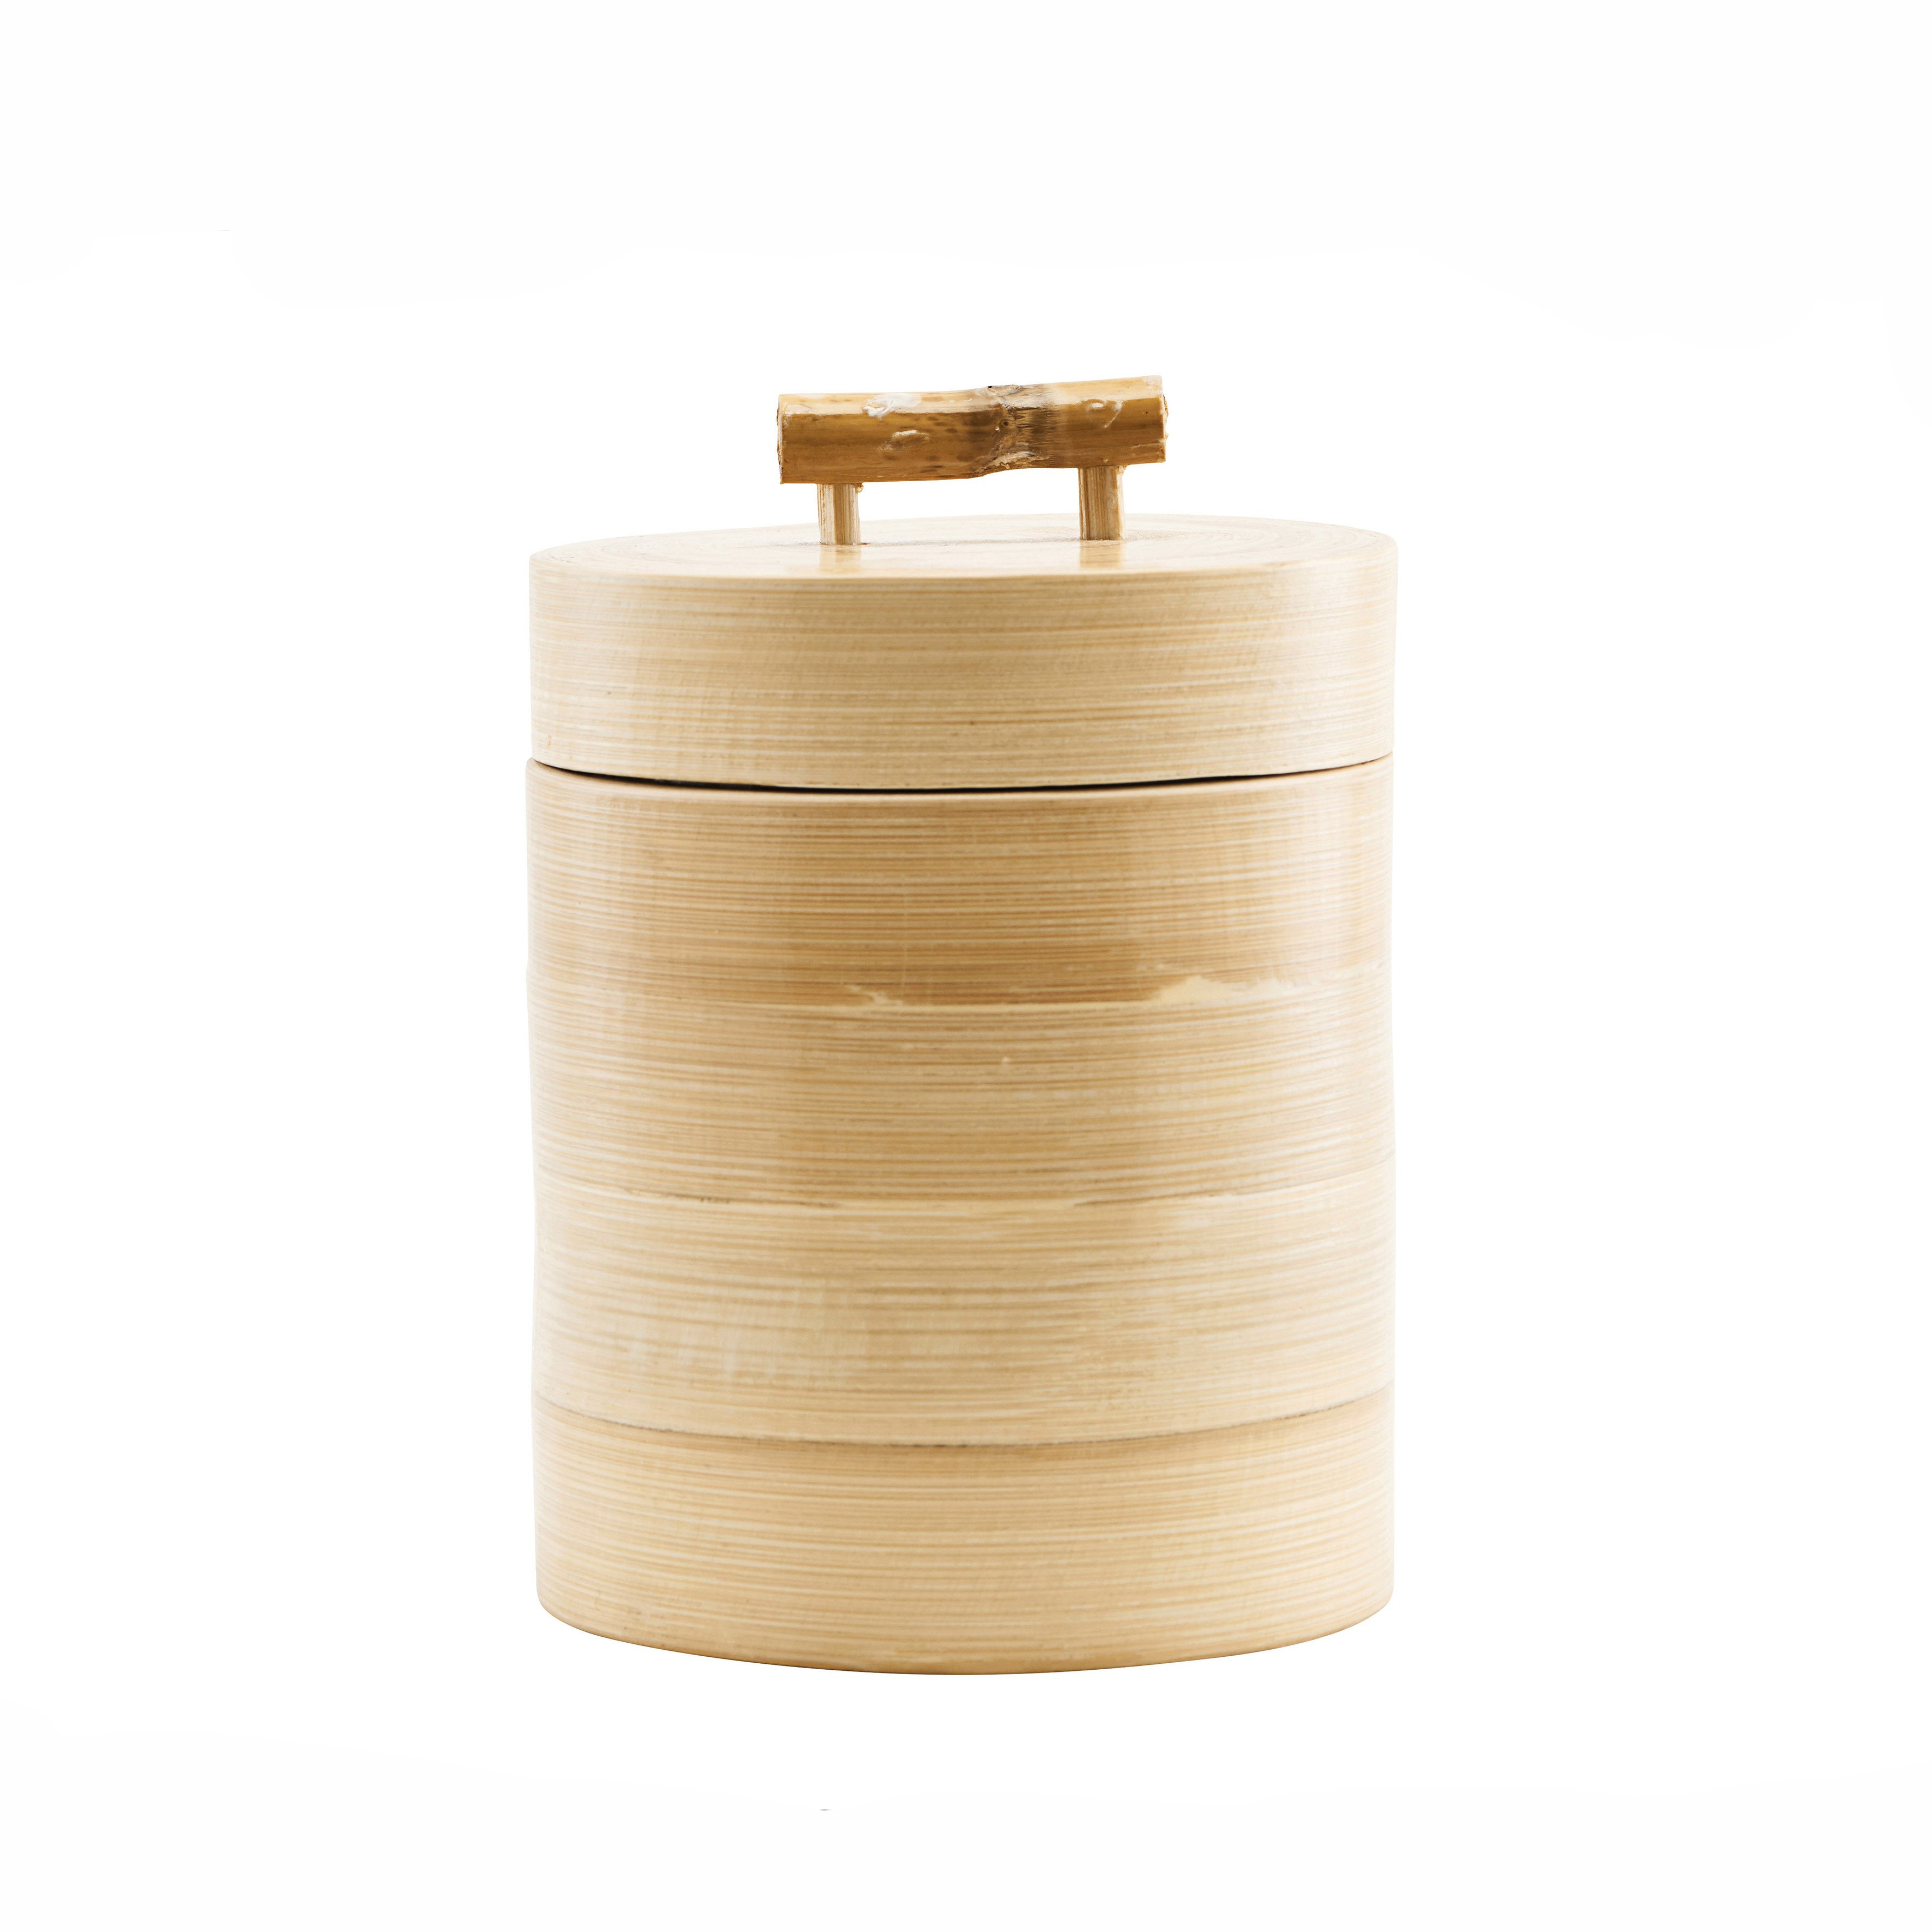 House Doctor Tall Lidded Wooden Storage with Bamboo Handle